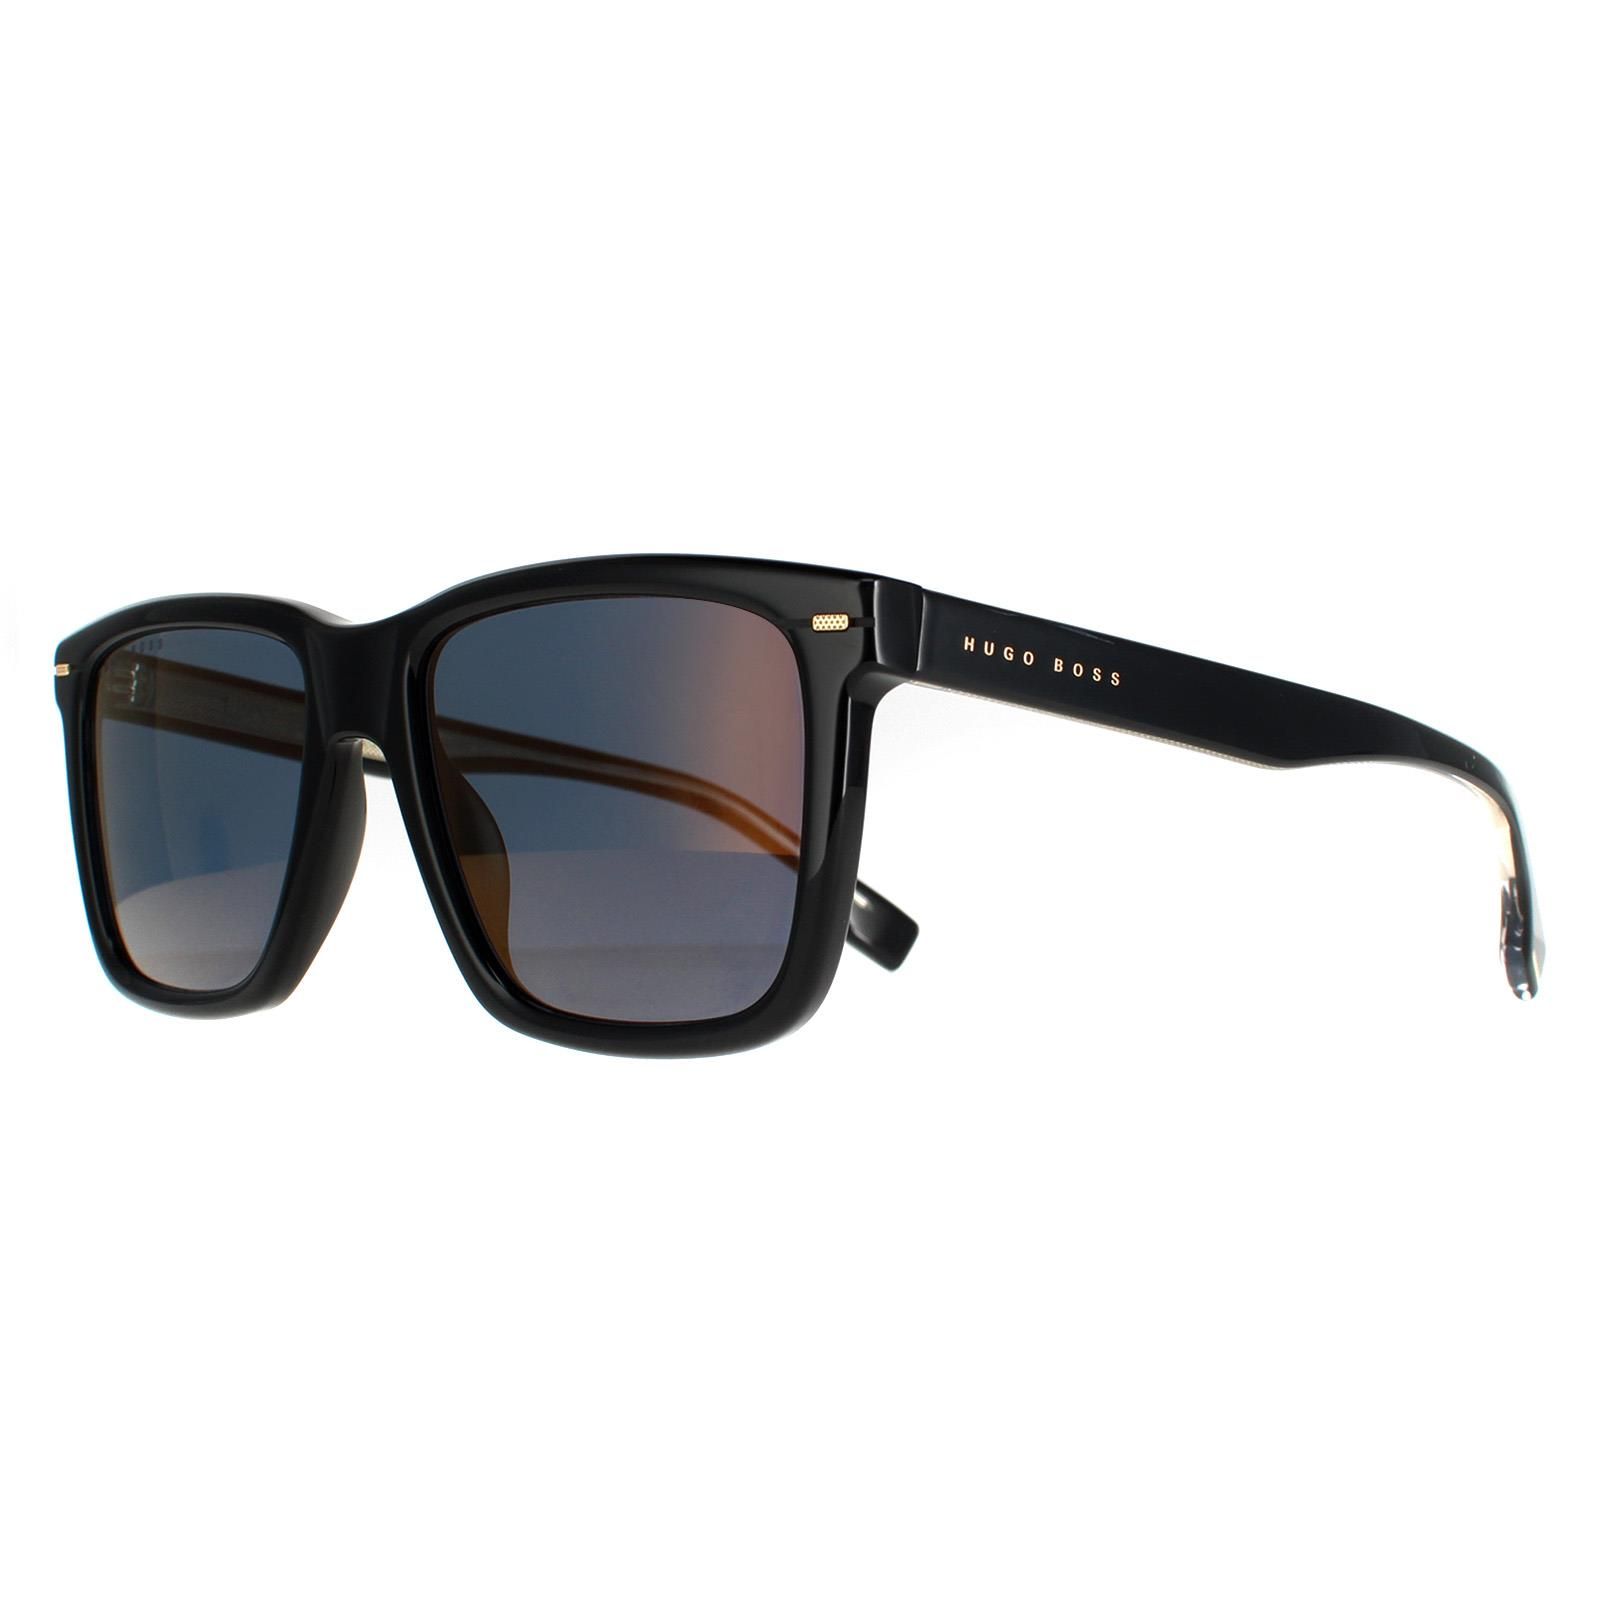 Hugo Boss Square Mens Black Brown Gold Mirrored BOSS 1317/S  Hugo Boss are a classic square style crafted from lightweight acetate. Hugo Boss branding features on the slender temples for authenticity.